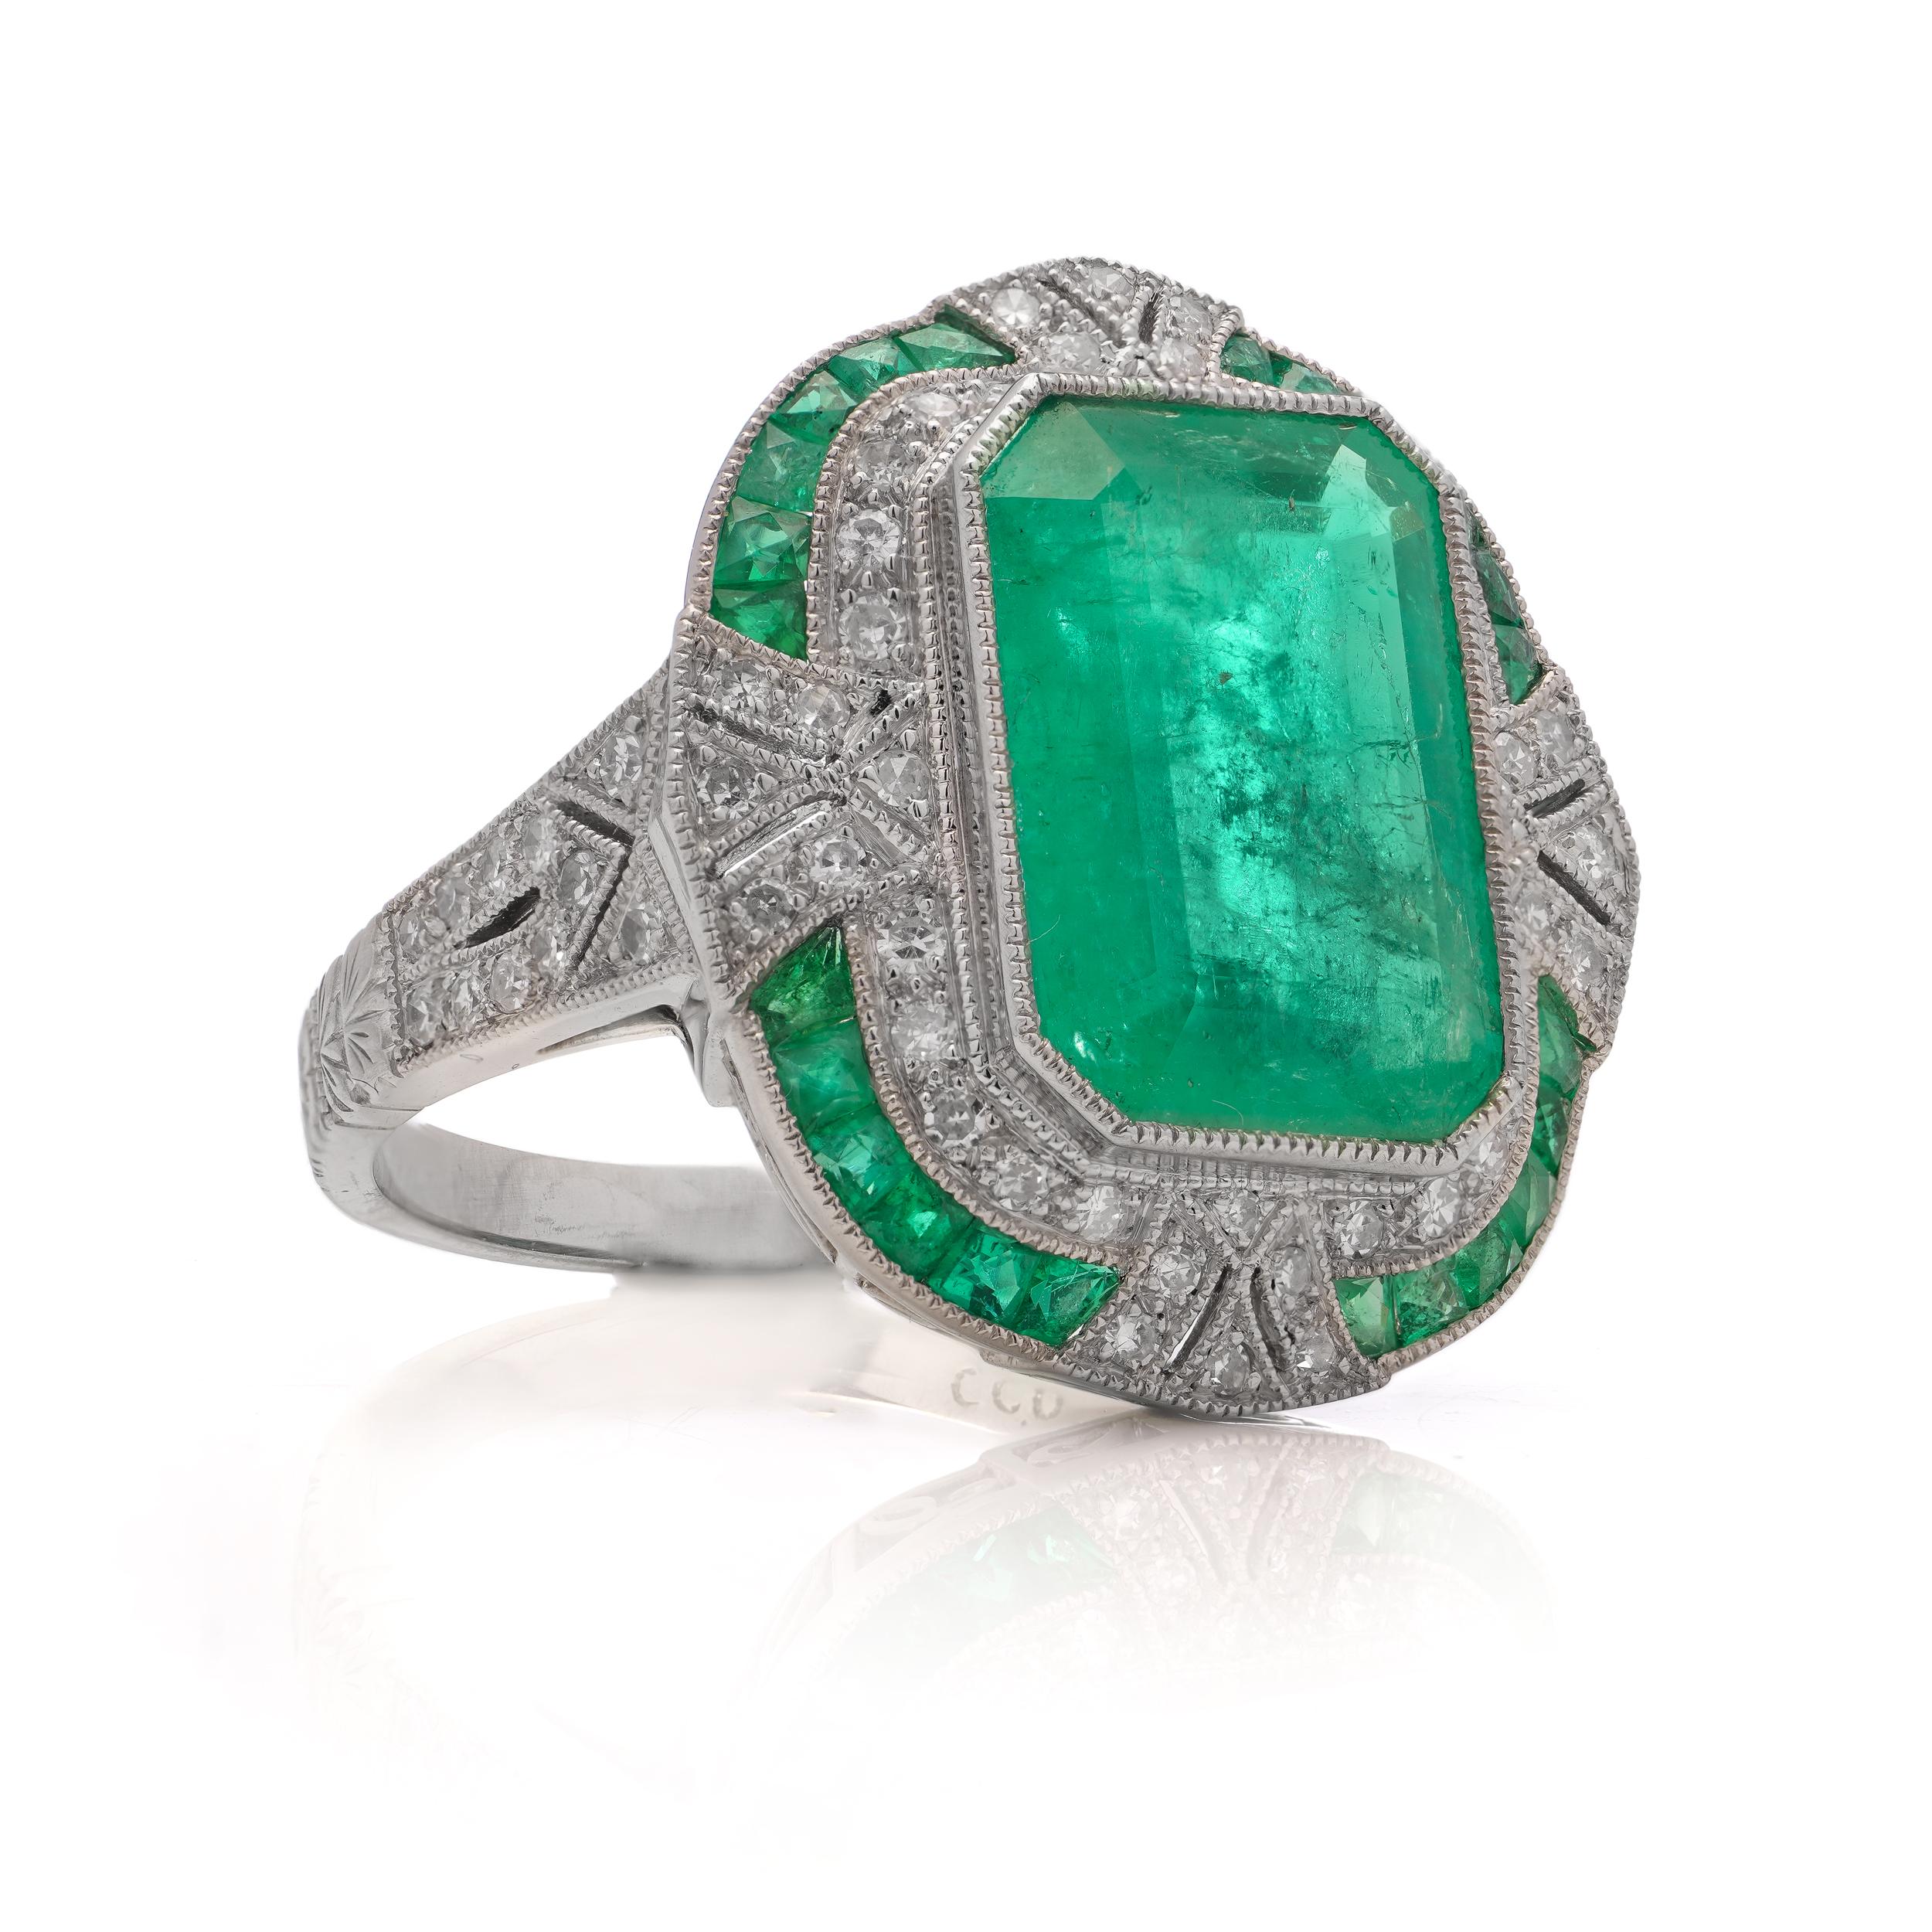 Platinum Art Deco-inspired 4.21 carats of Emerald fashion ring, surrounded by 0.66 carats of round brilliant cut diamonds.

Made in After 2000
Maker: JoAq
The ring tested positive for .850 platinum purity.

Dimensions -
Ring Size (UK) = N 1/2 (EU) =